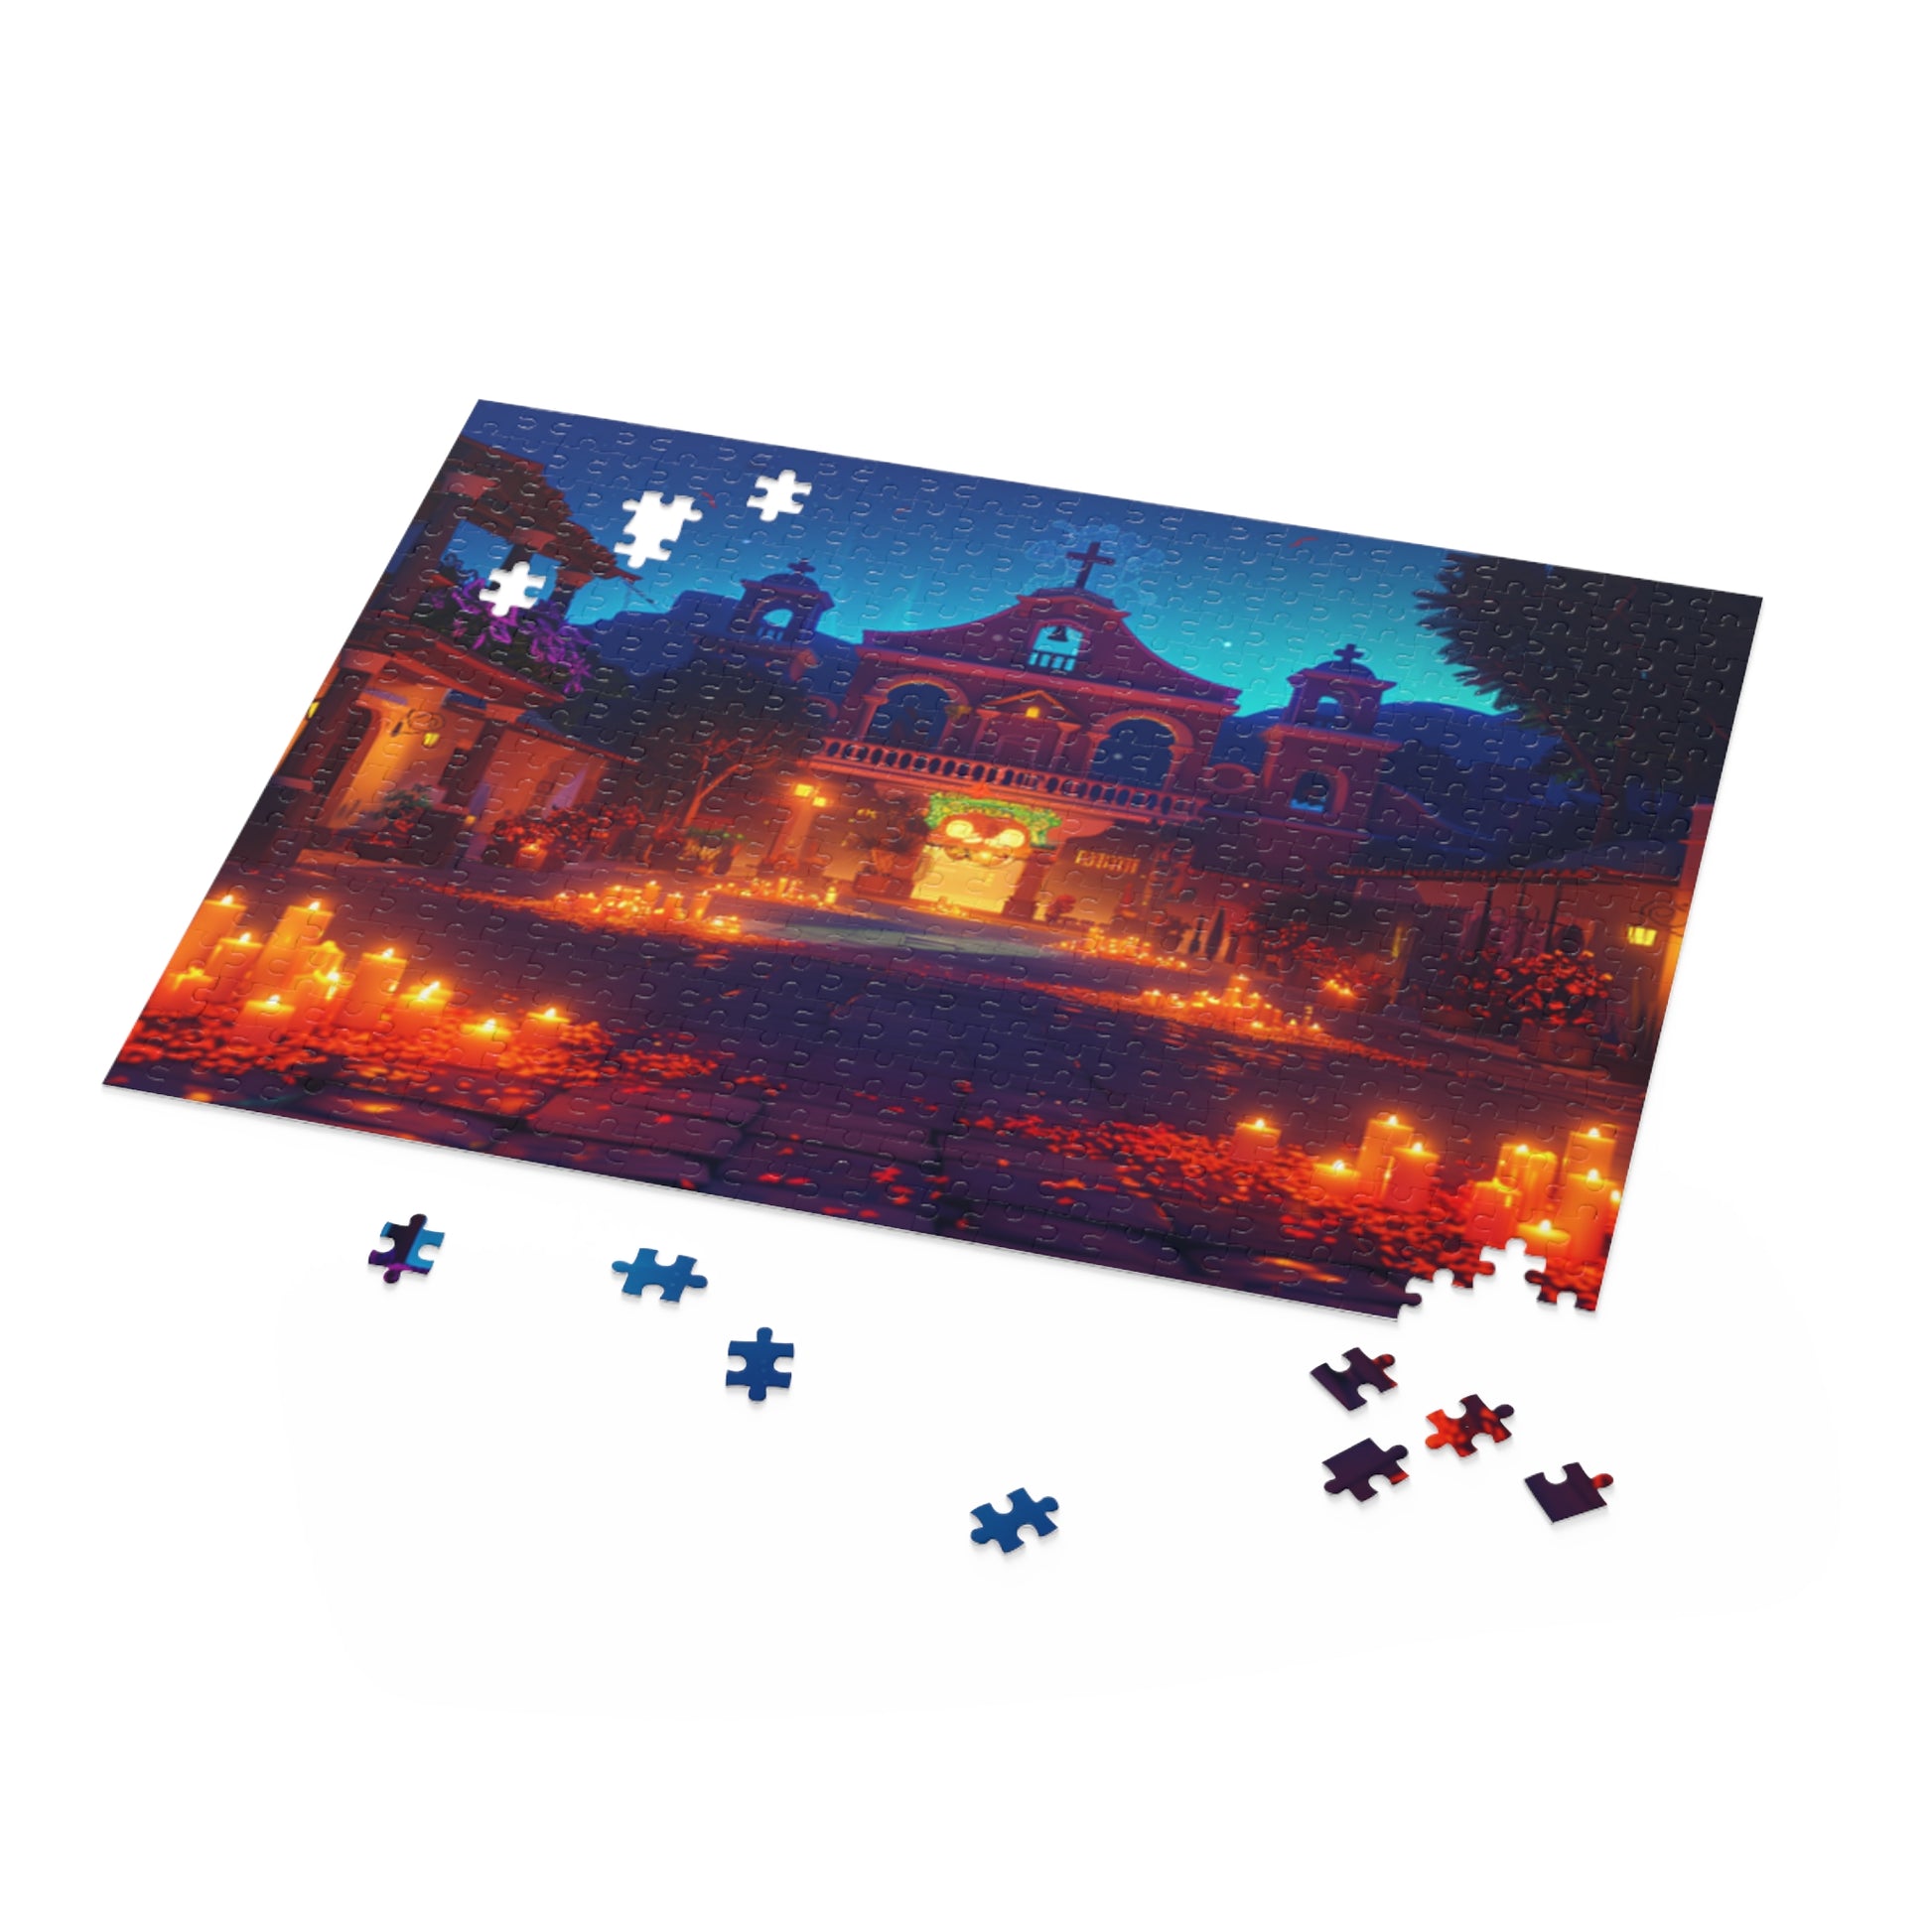 Mexican Art Church Candle Night Retro Jigsaw Puzzle Adult Birthday Business Jigsaw Puzzle Gift for Him Funny Humorous Indoor Outdoor Game Gift For Her Online-5